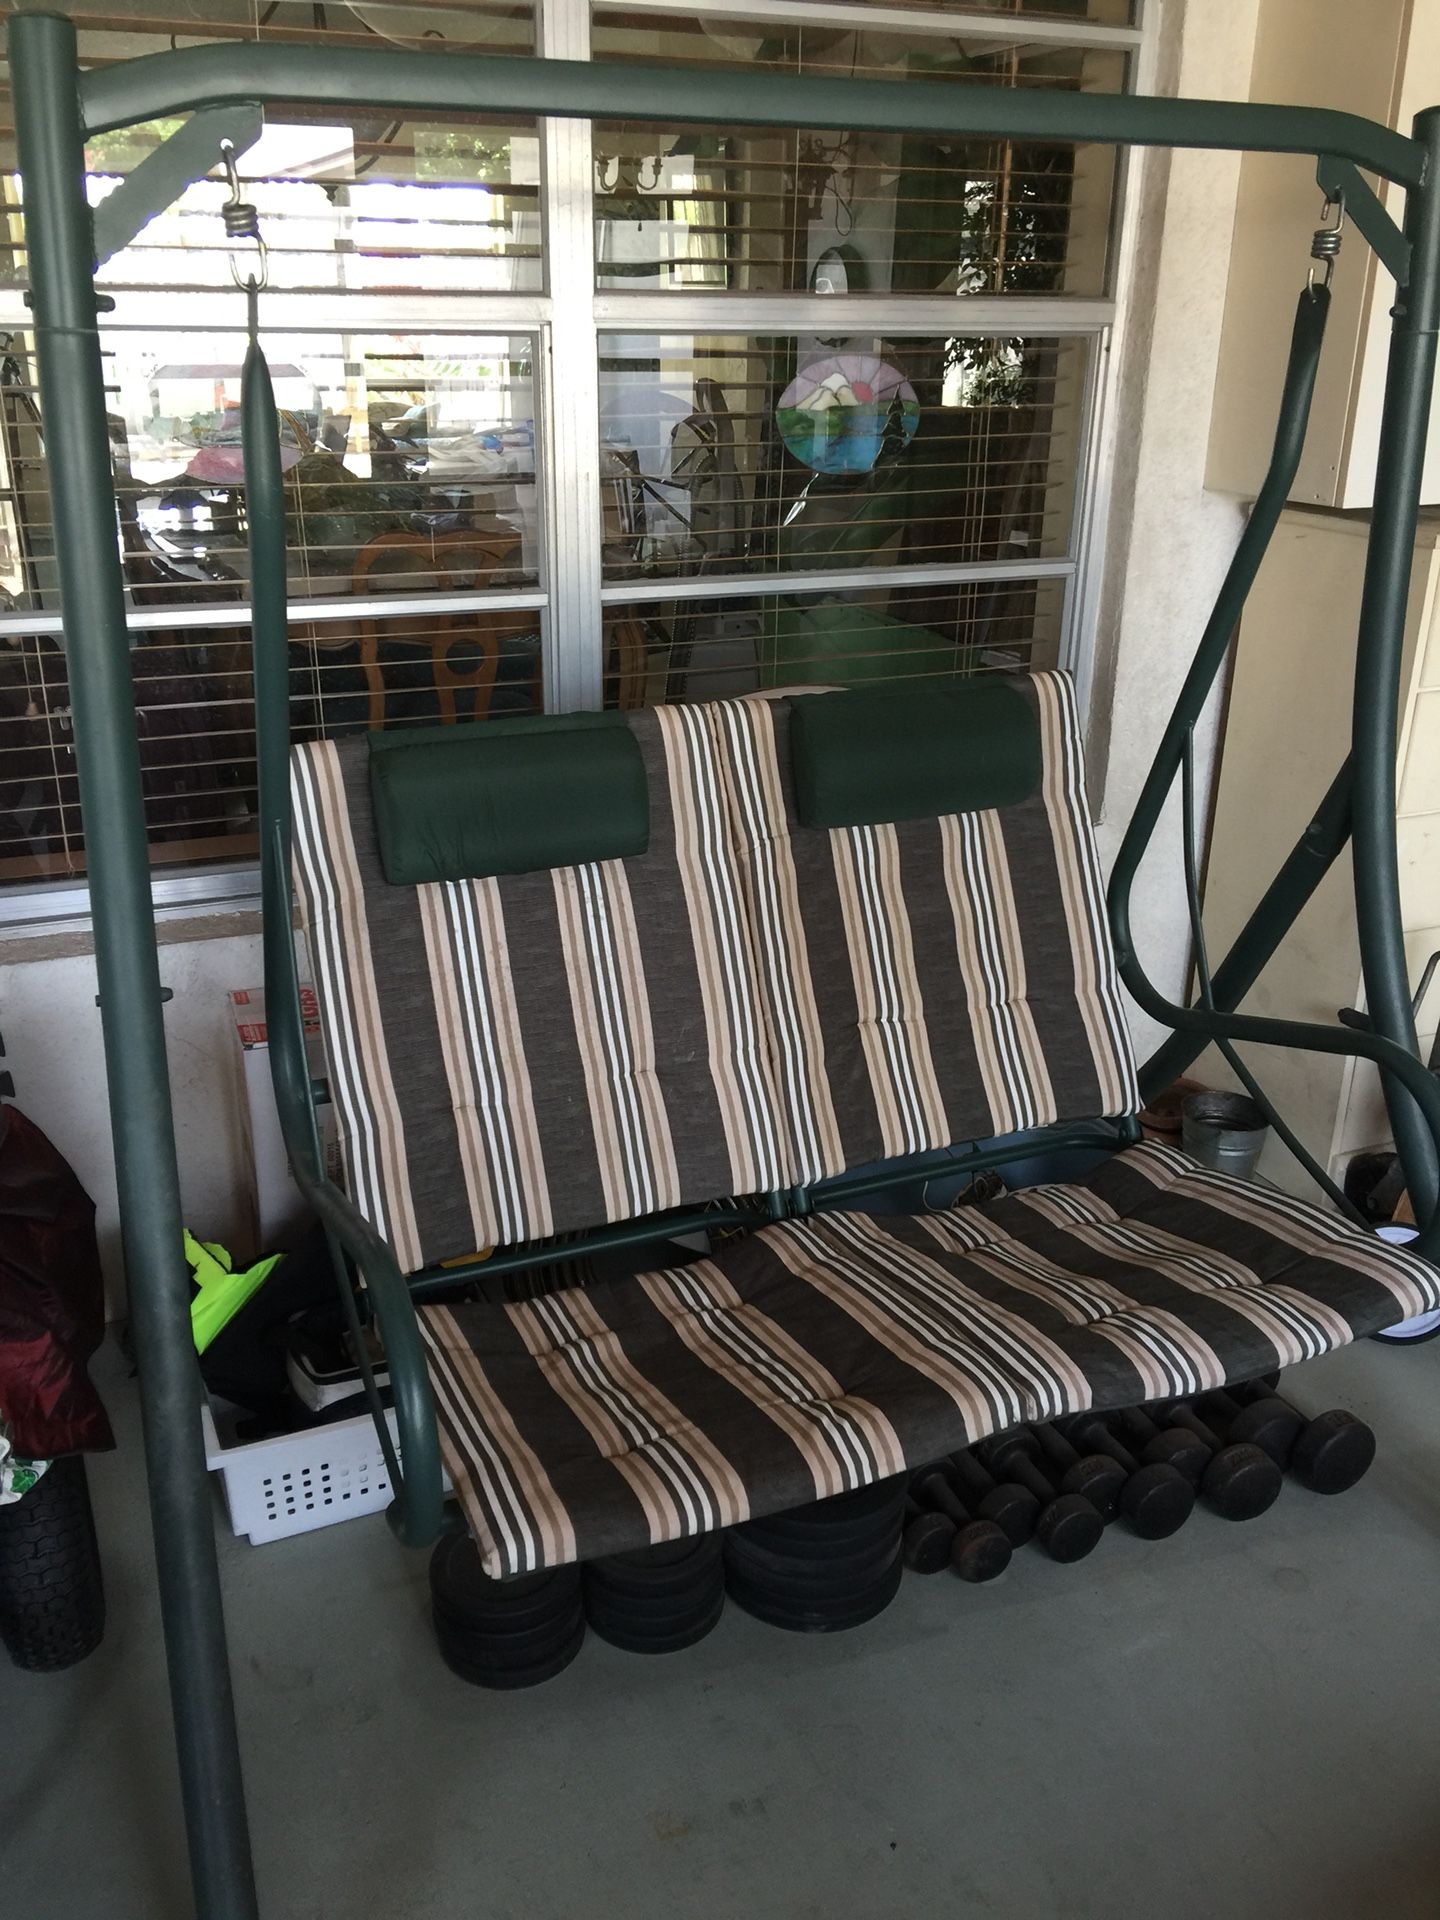 Patio swing chair outdoor furniture